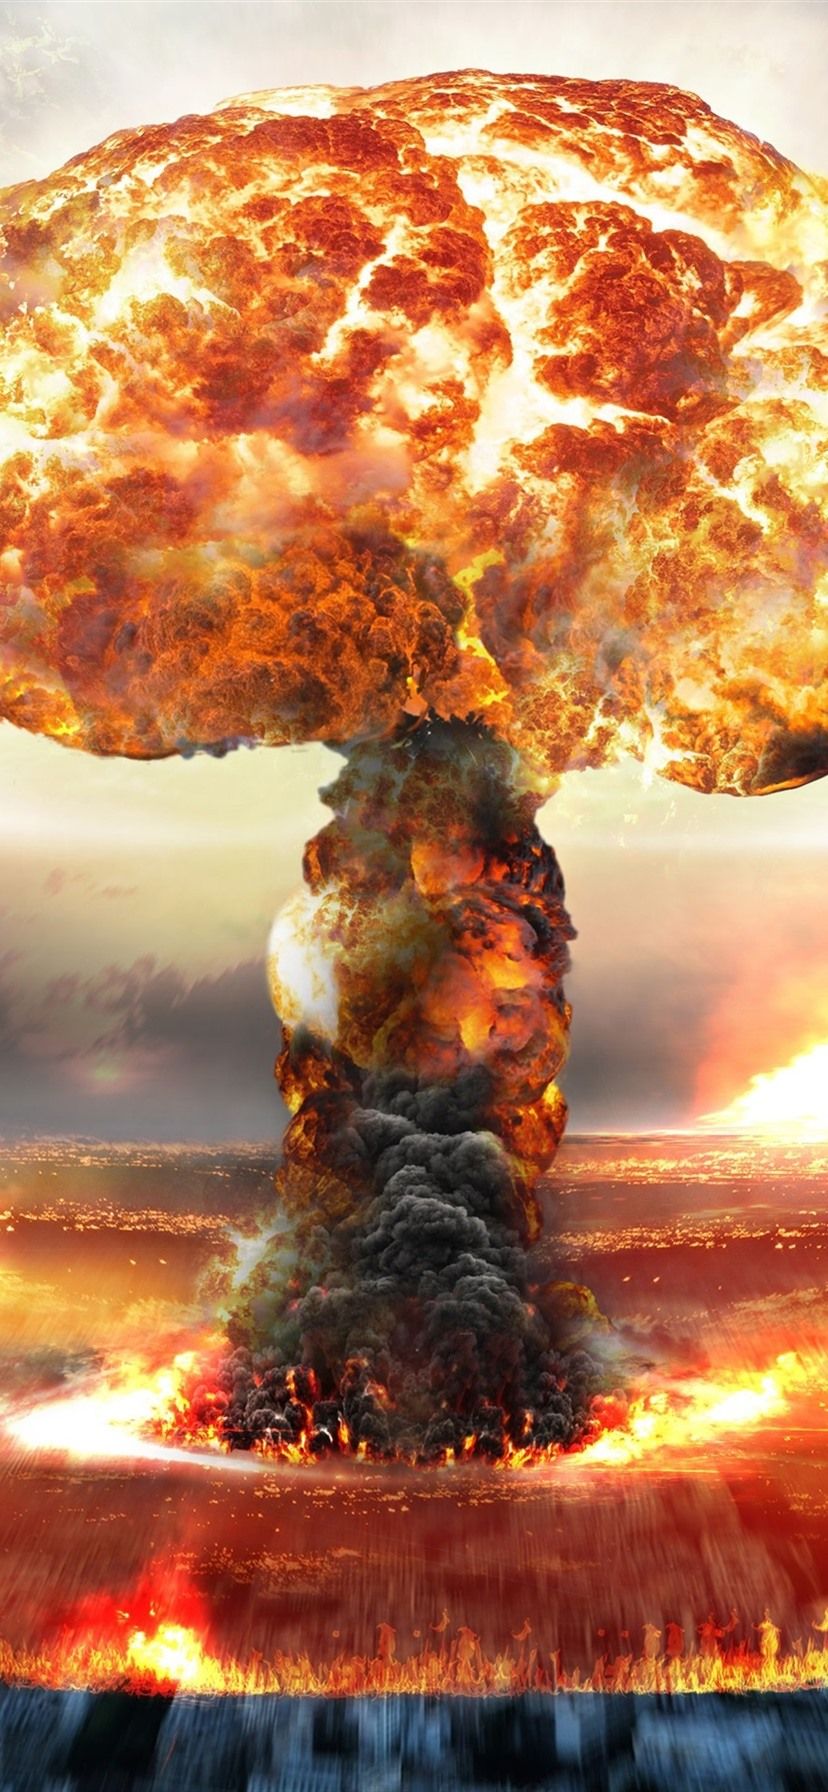 Wallpapers Nuclear bomb explosion, mushroom cloud 3840x2160 UHD 4K Picture, Image